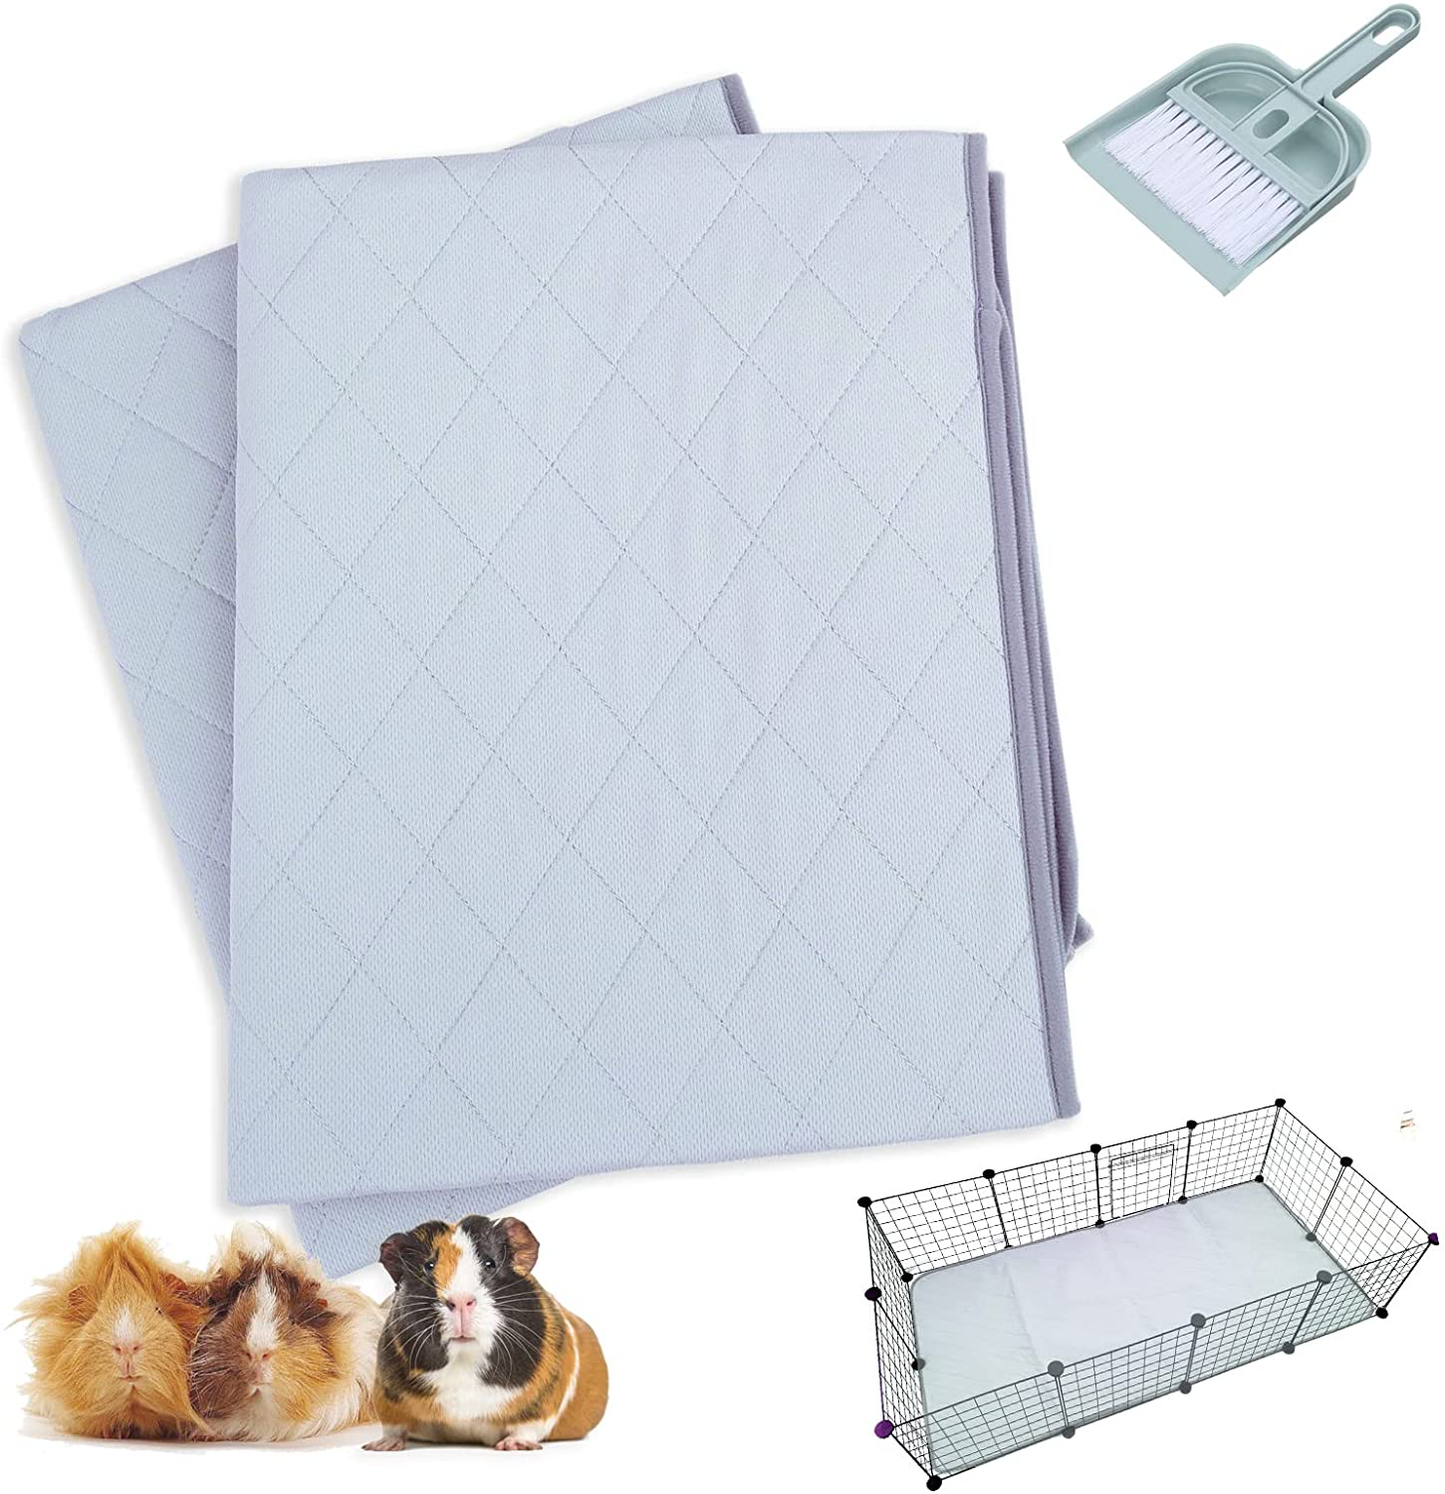 DOZZOPET Guinea Pig Cage Liners,Small Animal Washable Absorbent Pee Pads,Waterproof Pet Bedding Mat with Dust Pan Set for Bunny,Rabbit,Hedgehog(2 Pack)